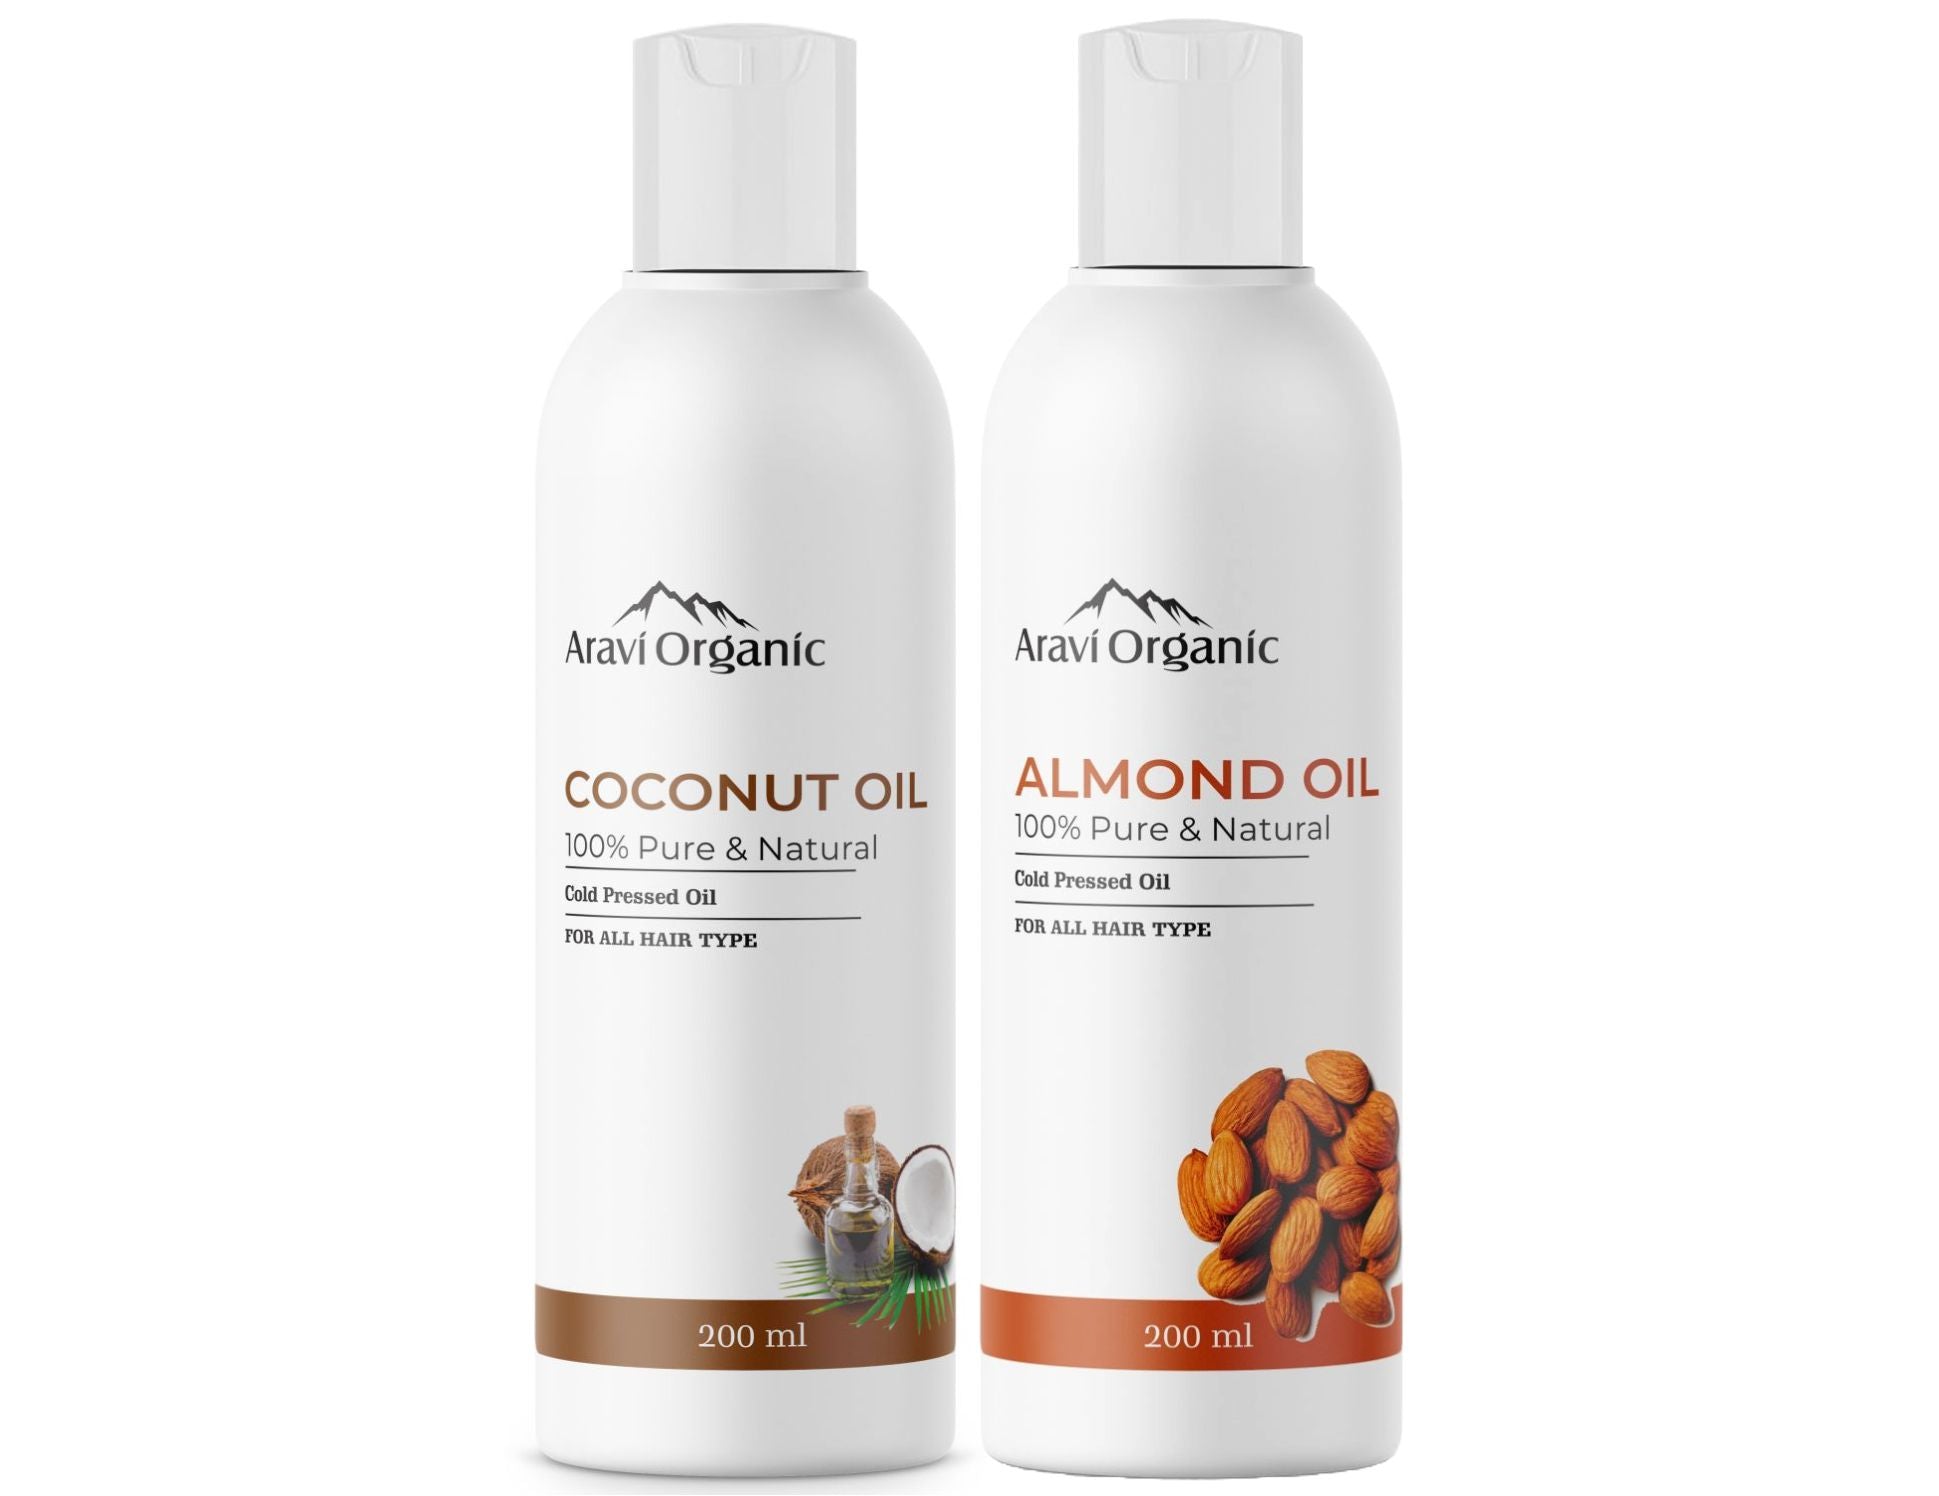 Cold Pressed Badam Rogan Sweet Almond Oil with Extra Virgin Cold Pressed Coconut Oil.